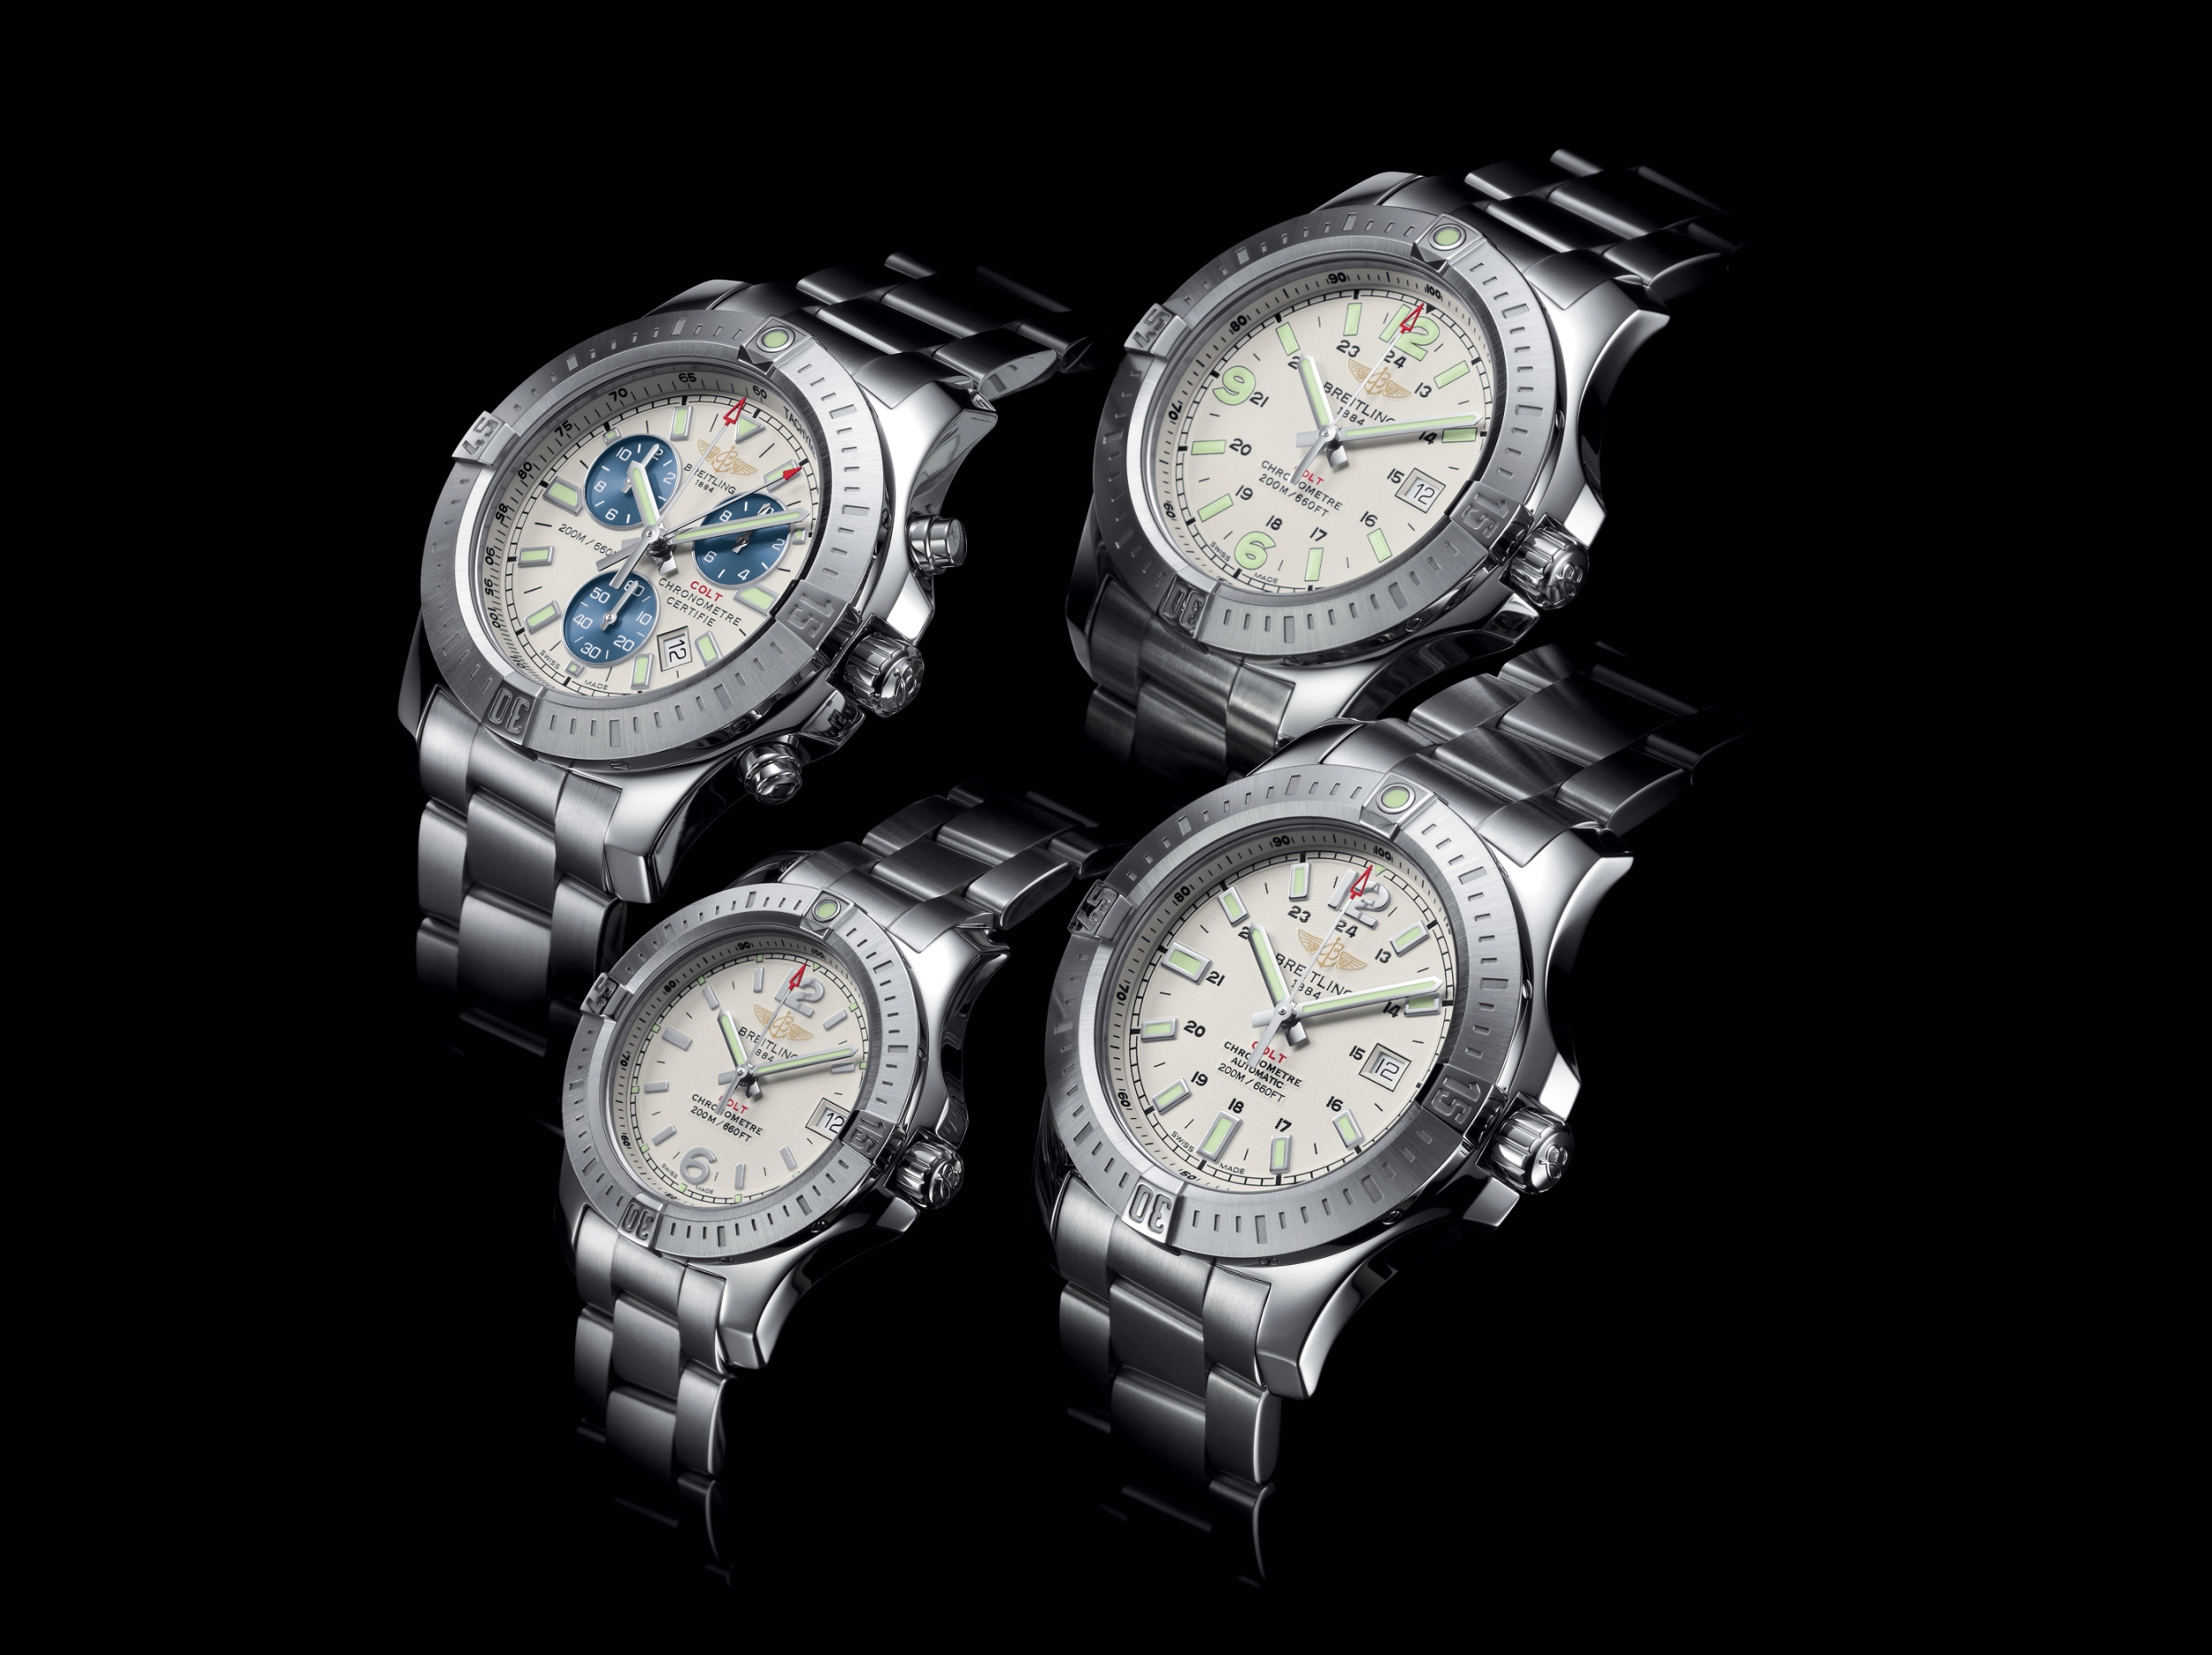 breitling Ocean Chronograph Reference AB0151 (B-P 2011)